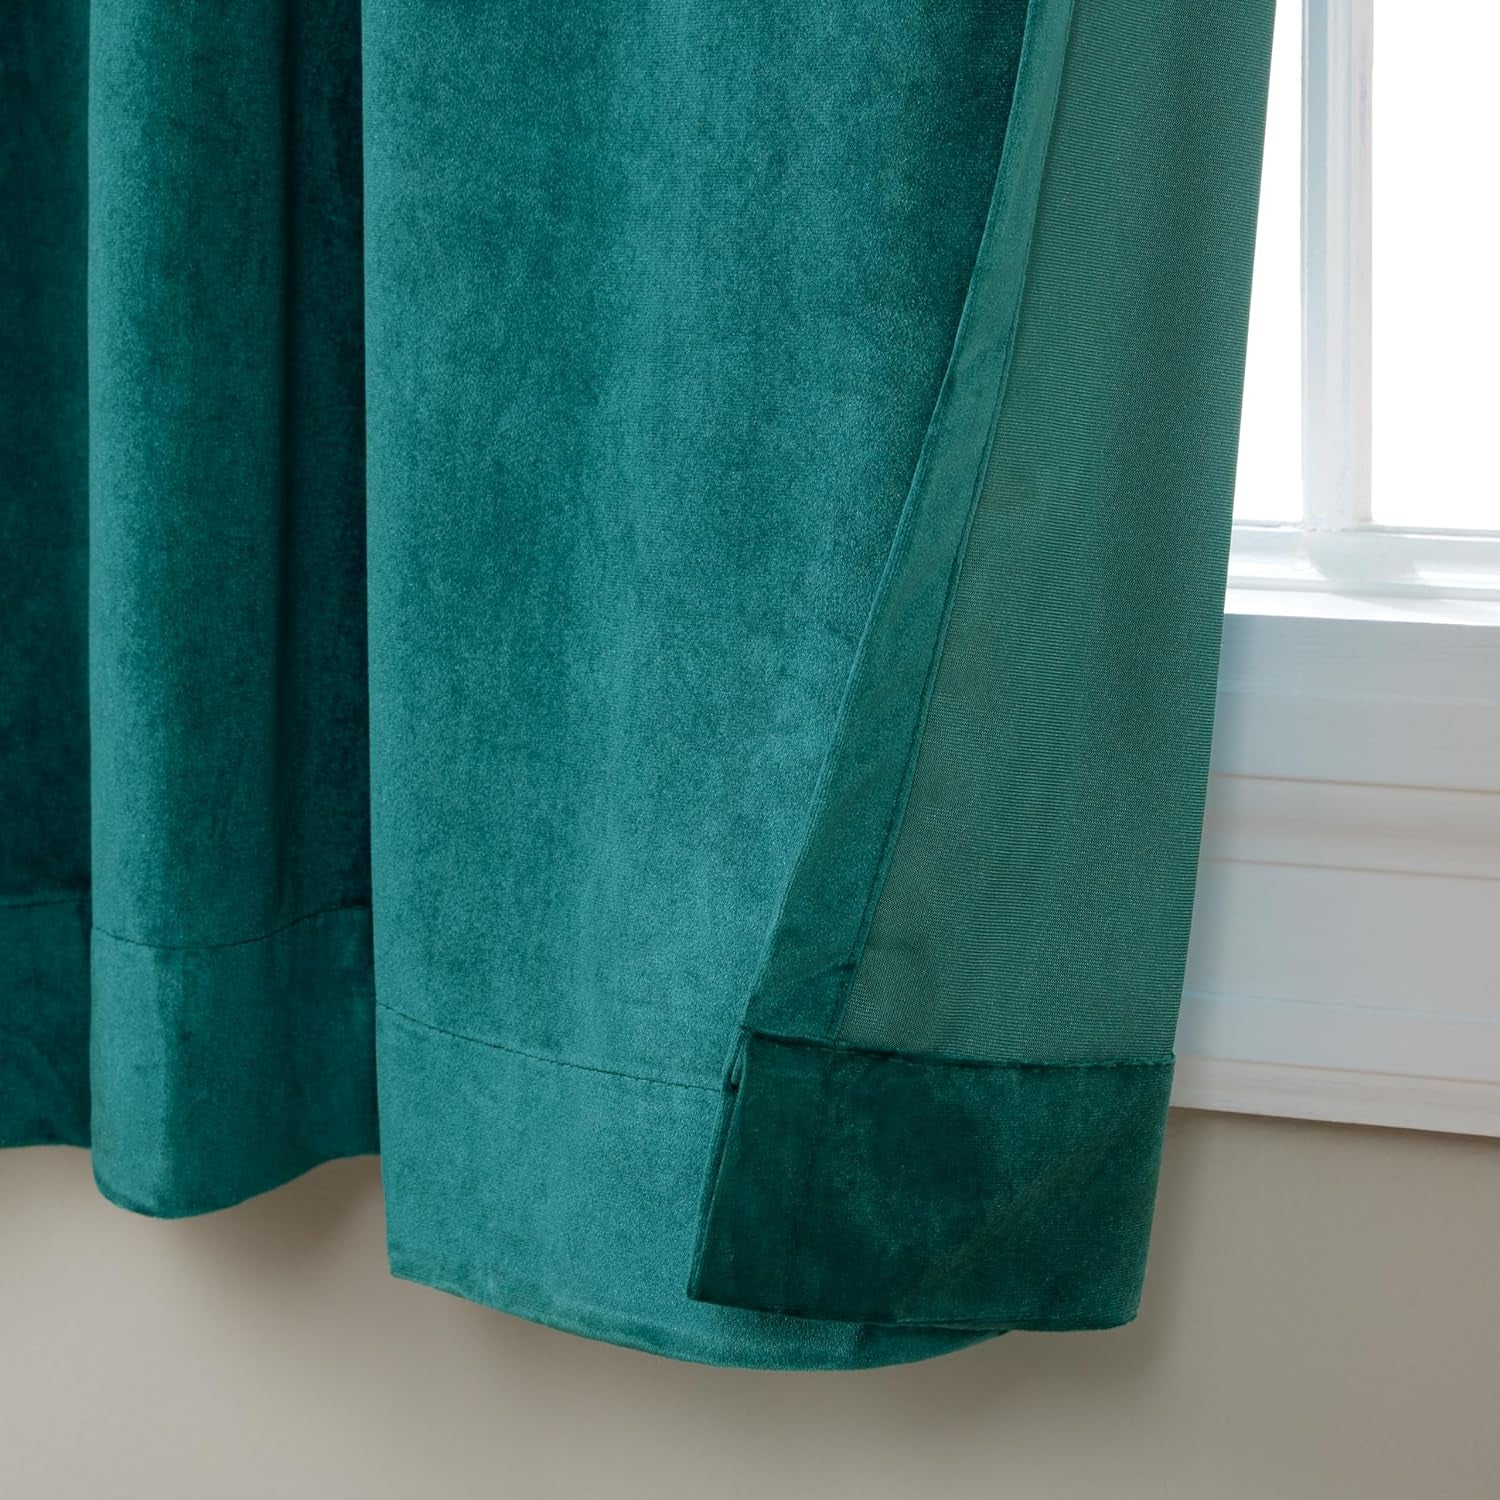 Exclusive Home Velvet Heavyweight Pinch Pleat Curtain Panel Pair, 108" Length, Teal  Exclusive Home Curtains   